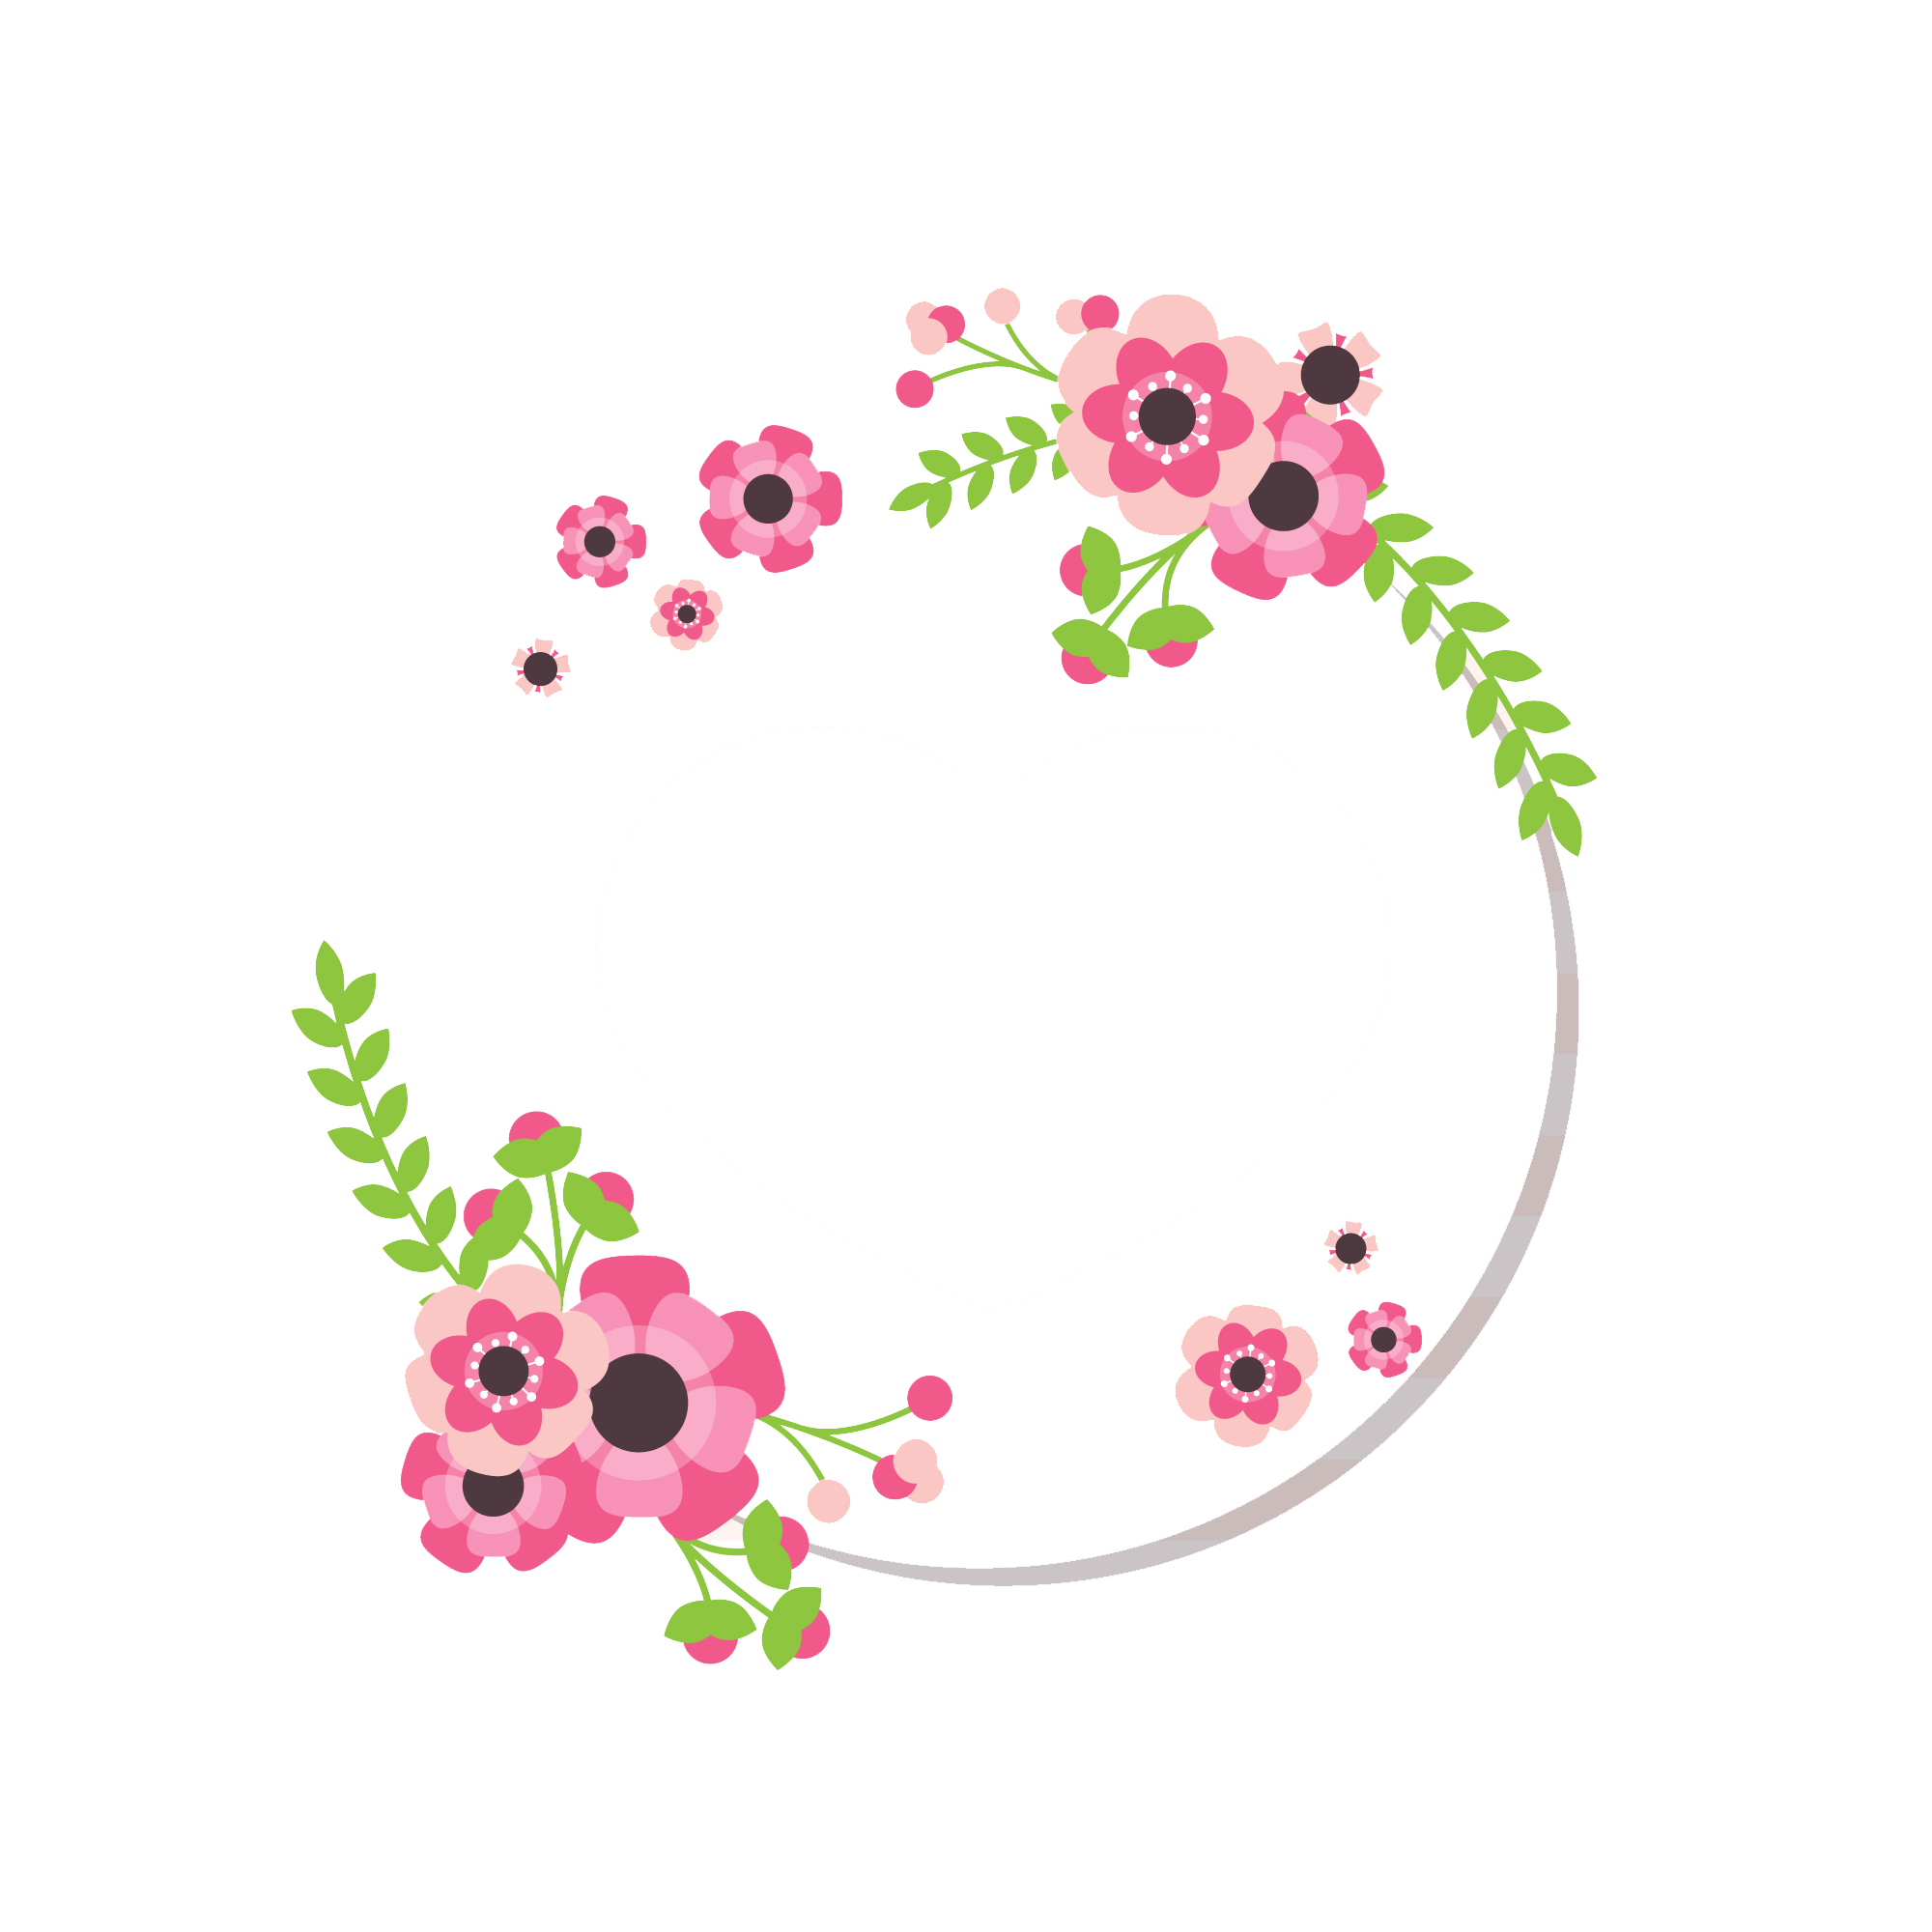 floral clipart mother's day